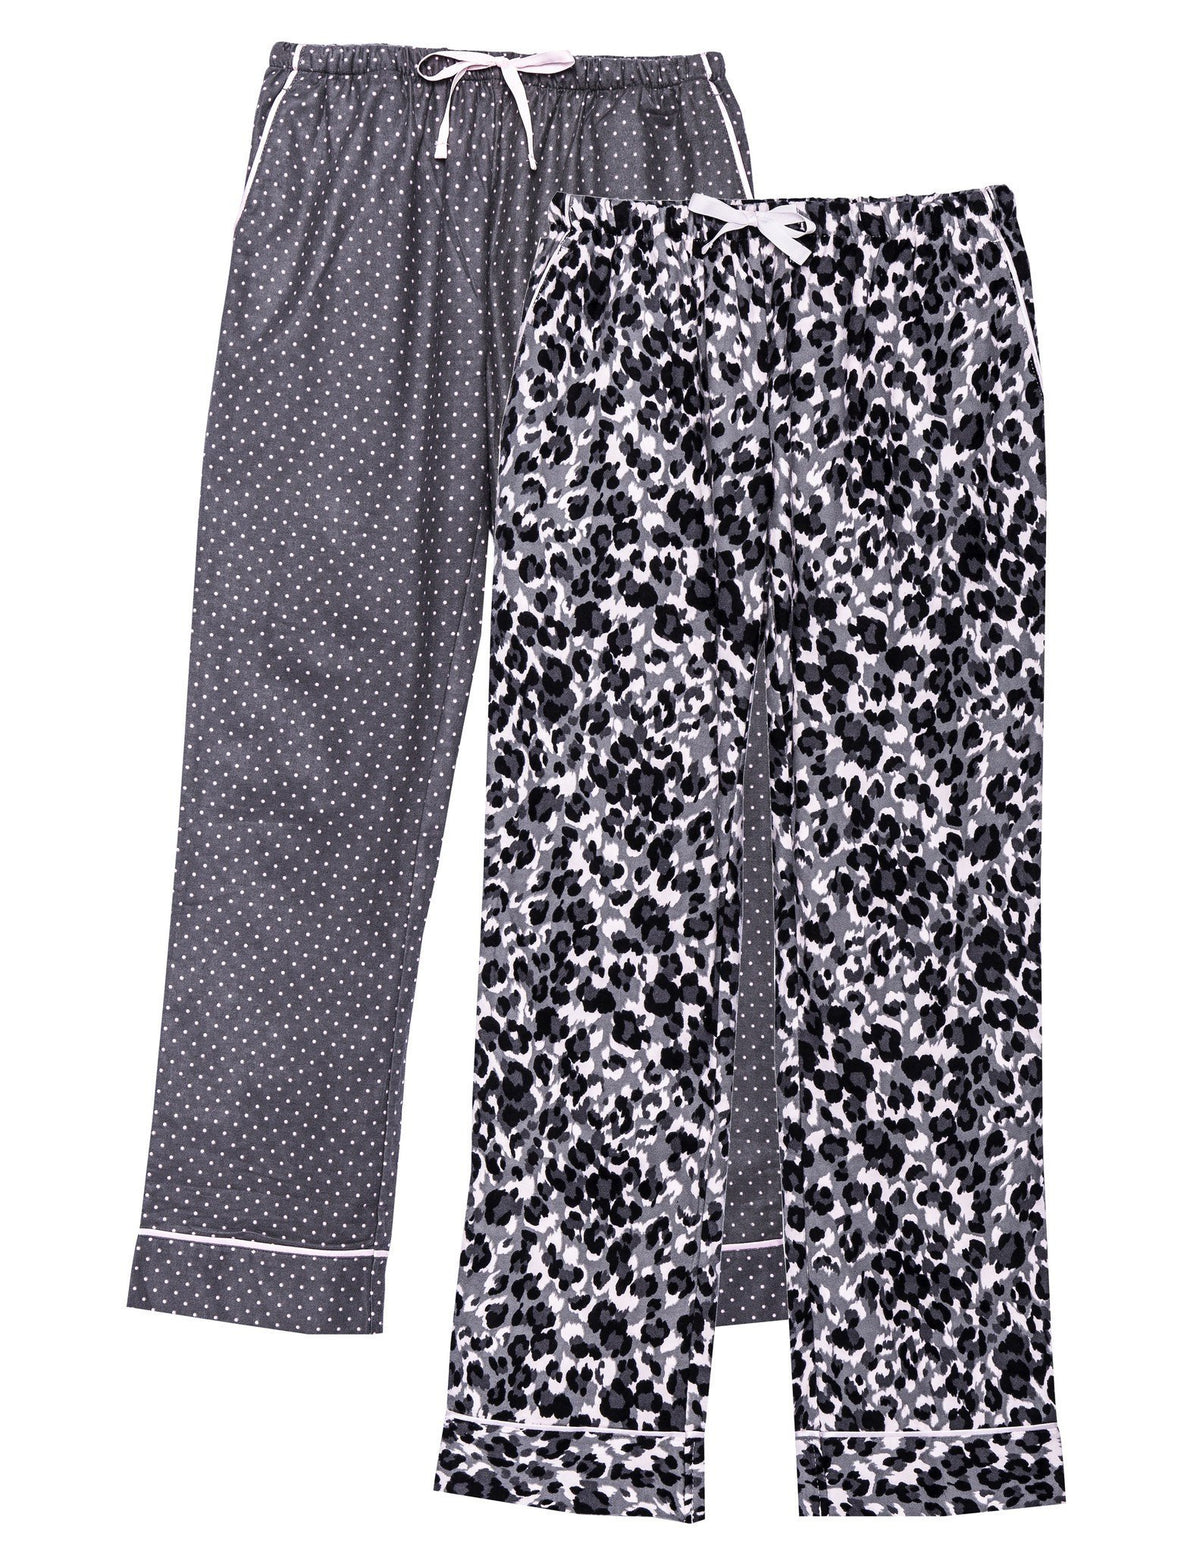 Women's 2 Pack Cotton Flannel Lounge Pants with Free Socks - 2-Pack with FREE Sock [Leopard/Pin Dots Grey]